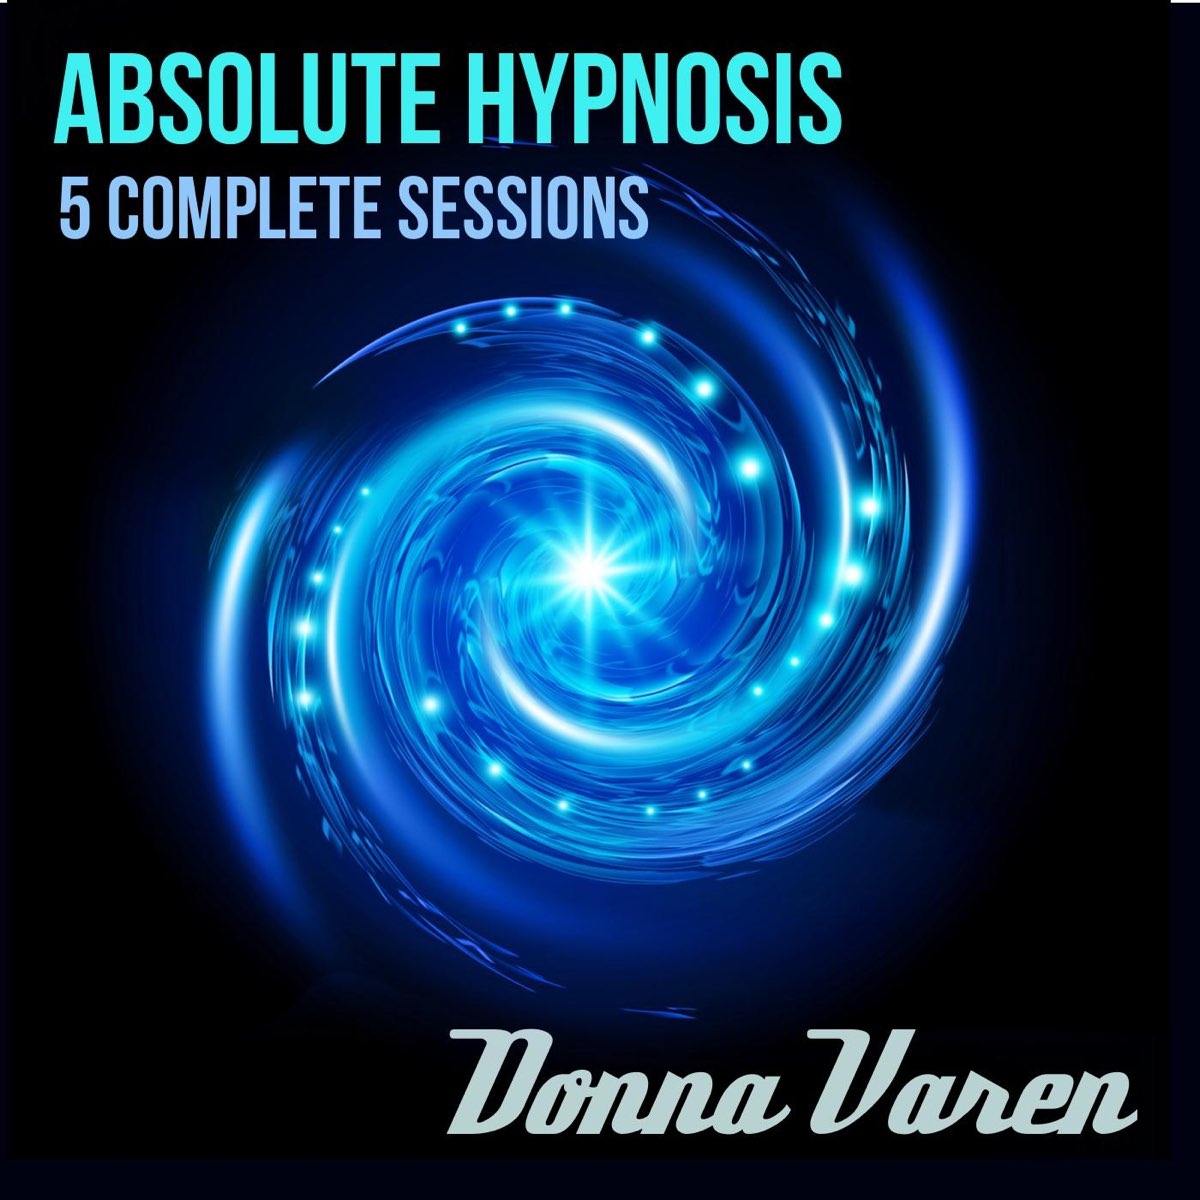 Absolut hypnosis